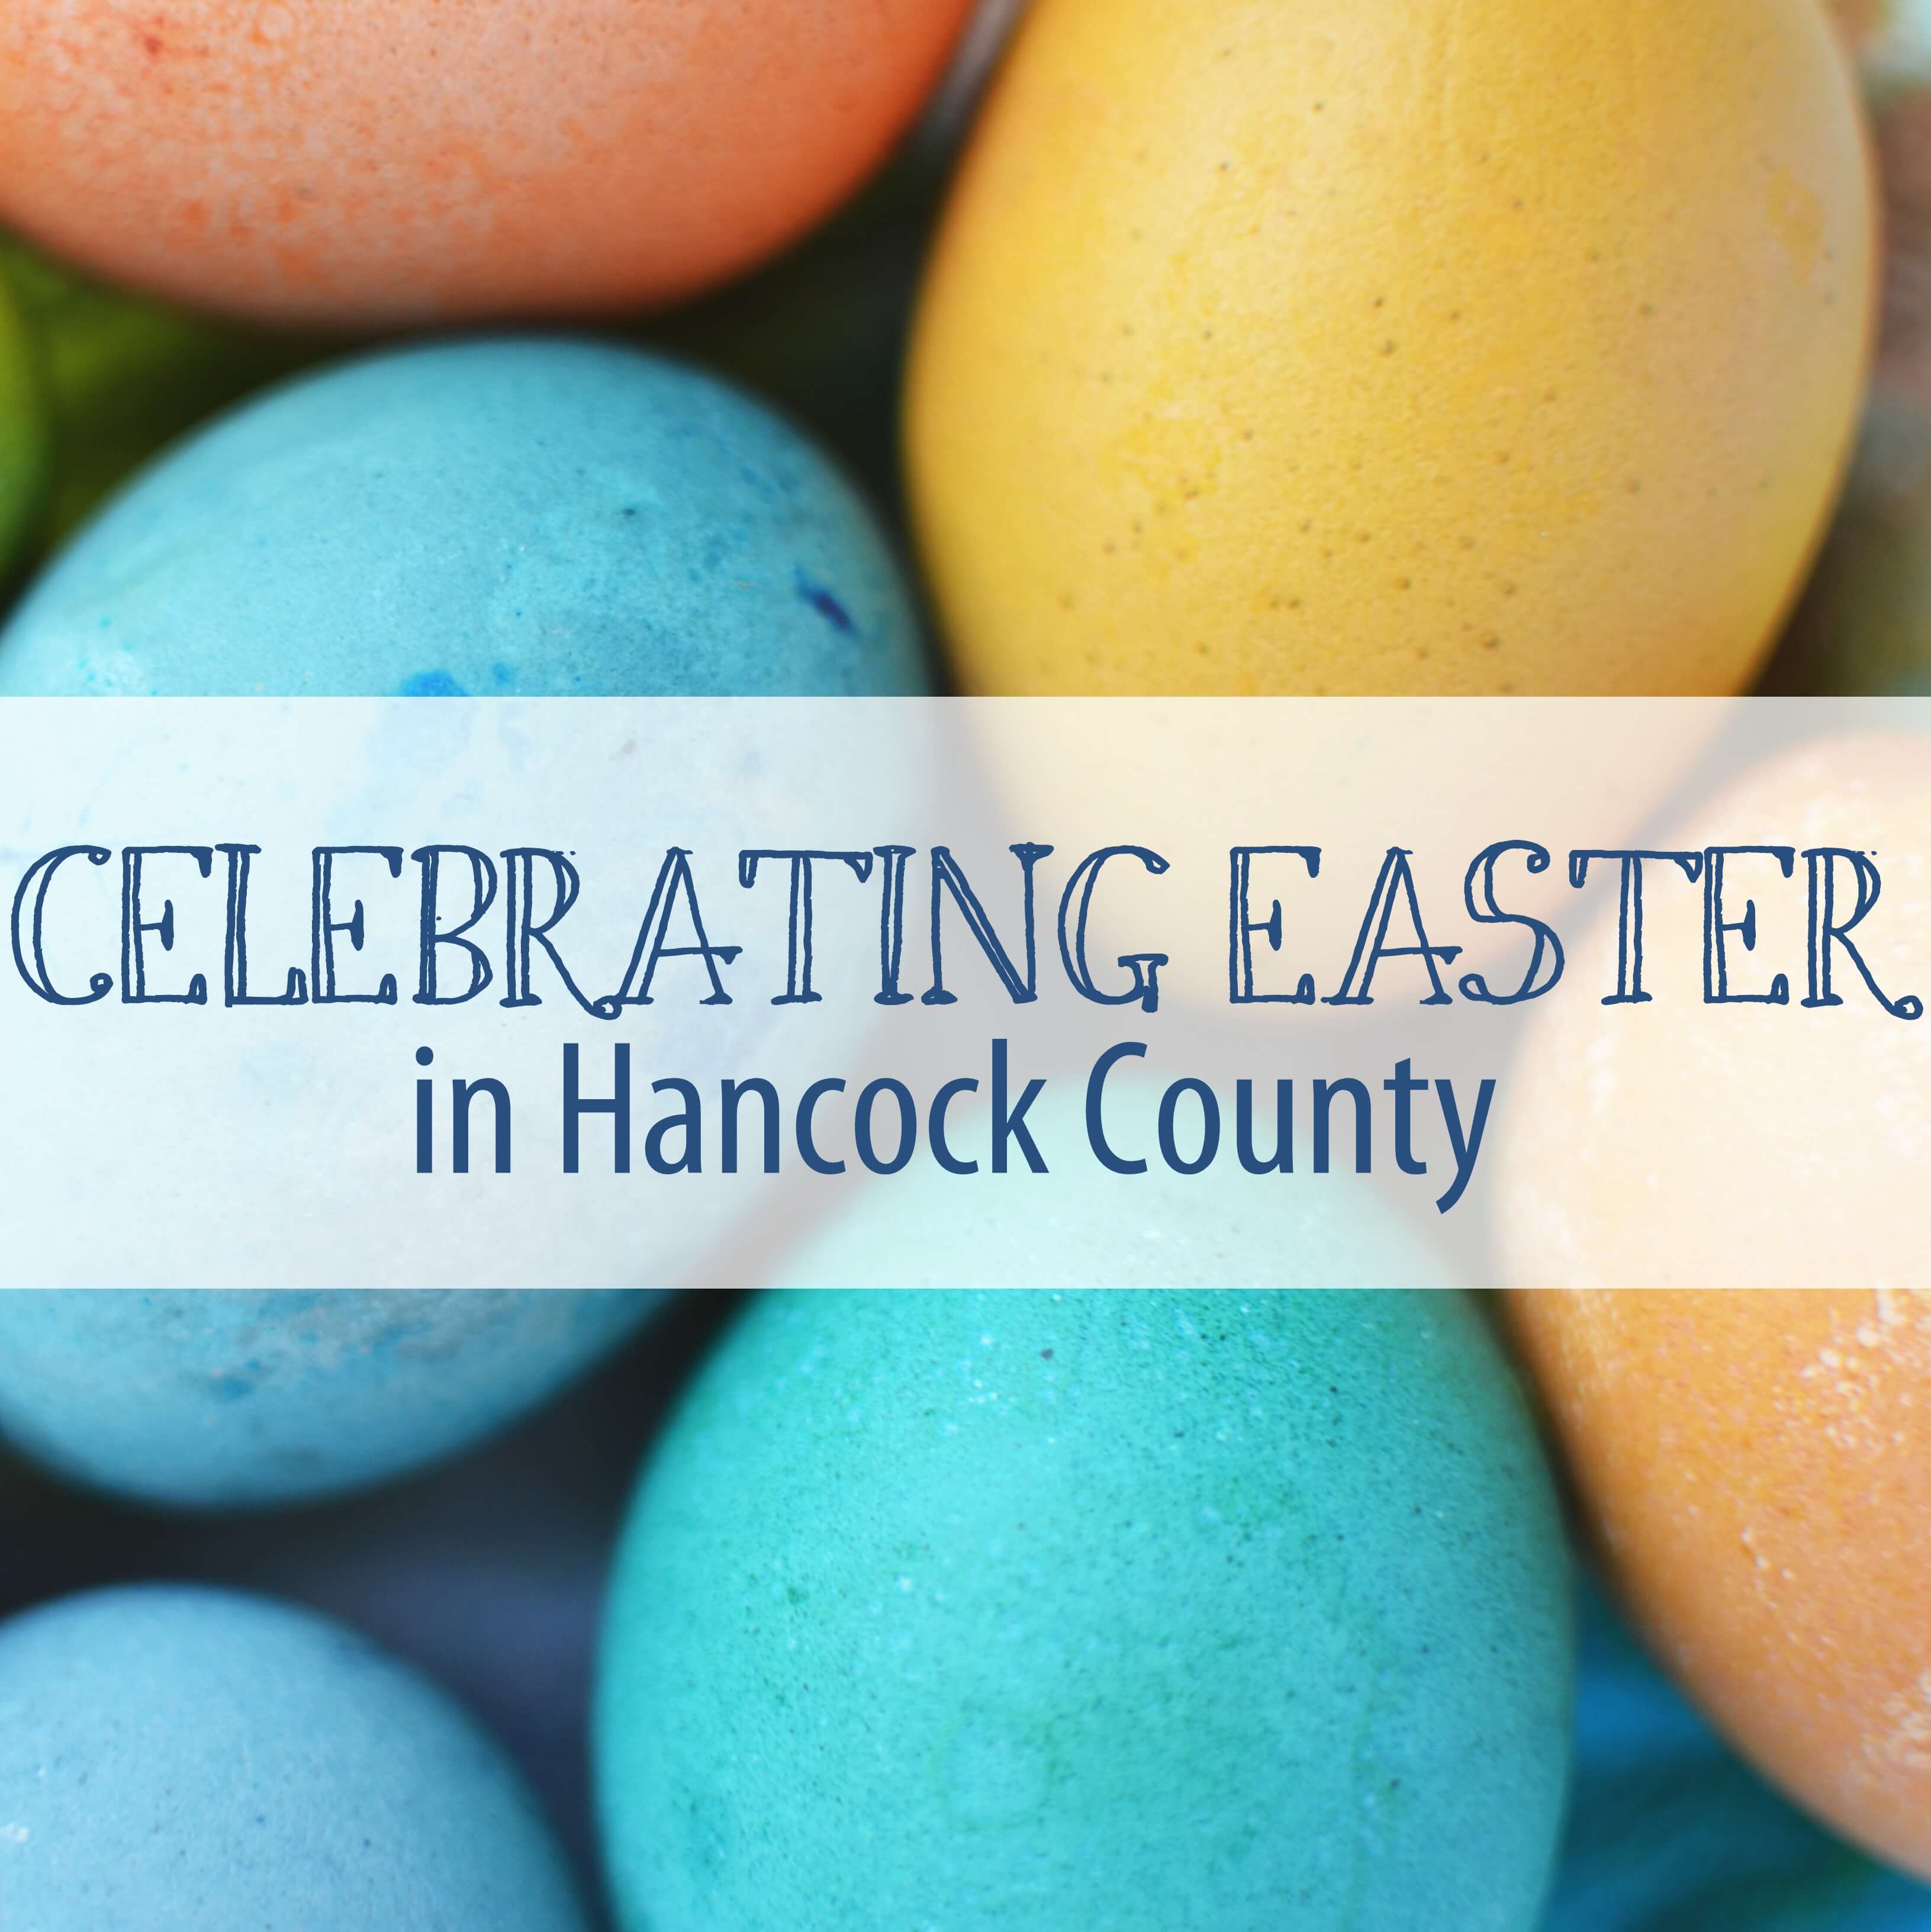 Celebrate Easter weekend in Hancock County with an Easter Egg hunt, enjoying Spring, and giving back. Plus, see what Findlay restaurants are open on Easter Sunday • VisitFindlay.com